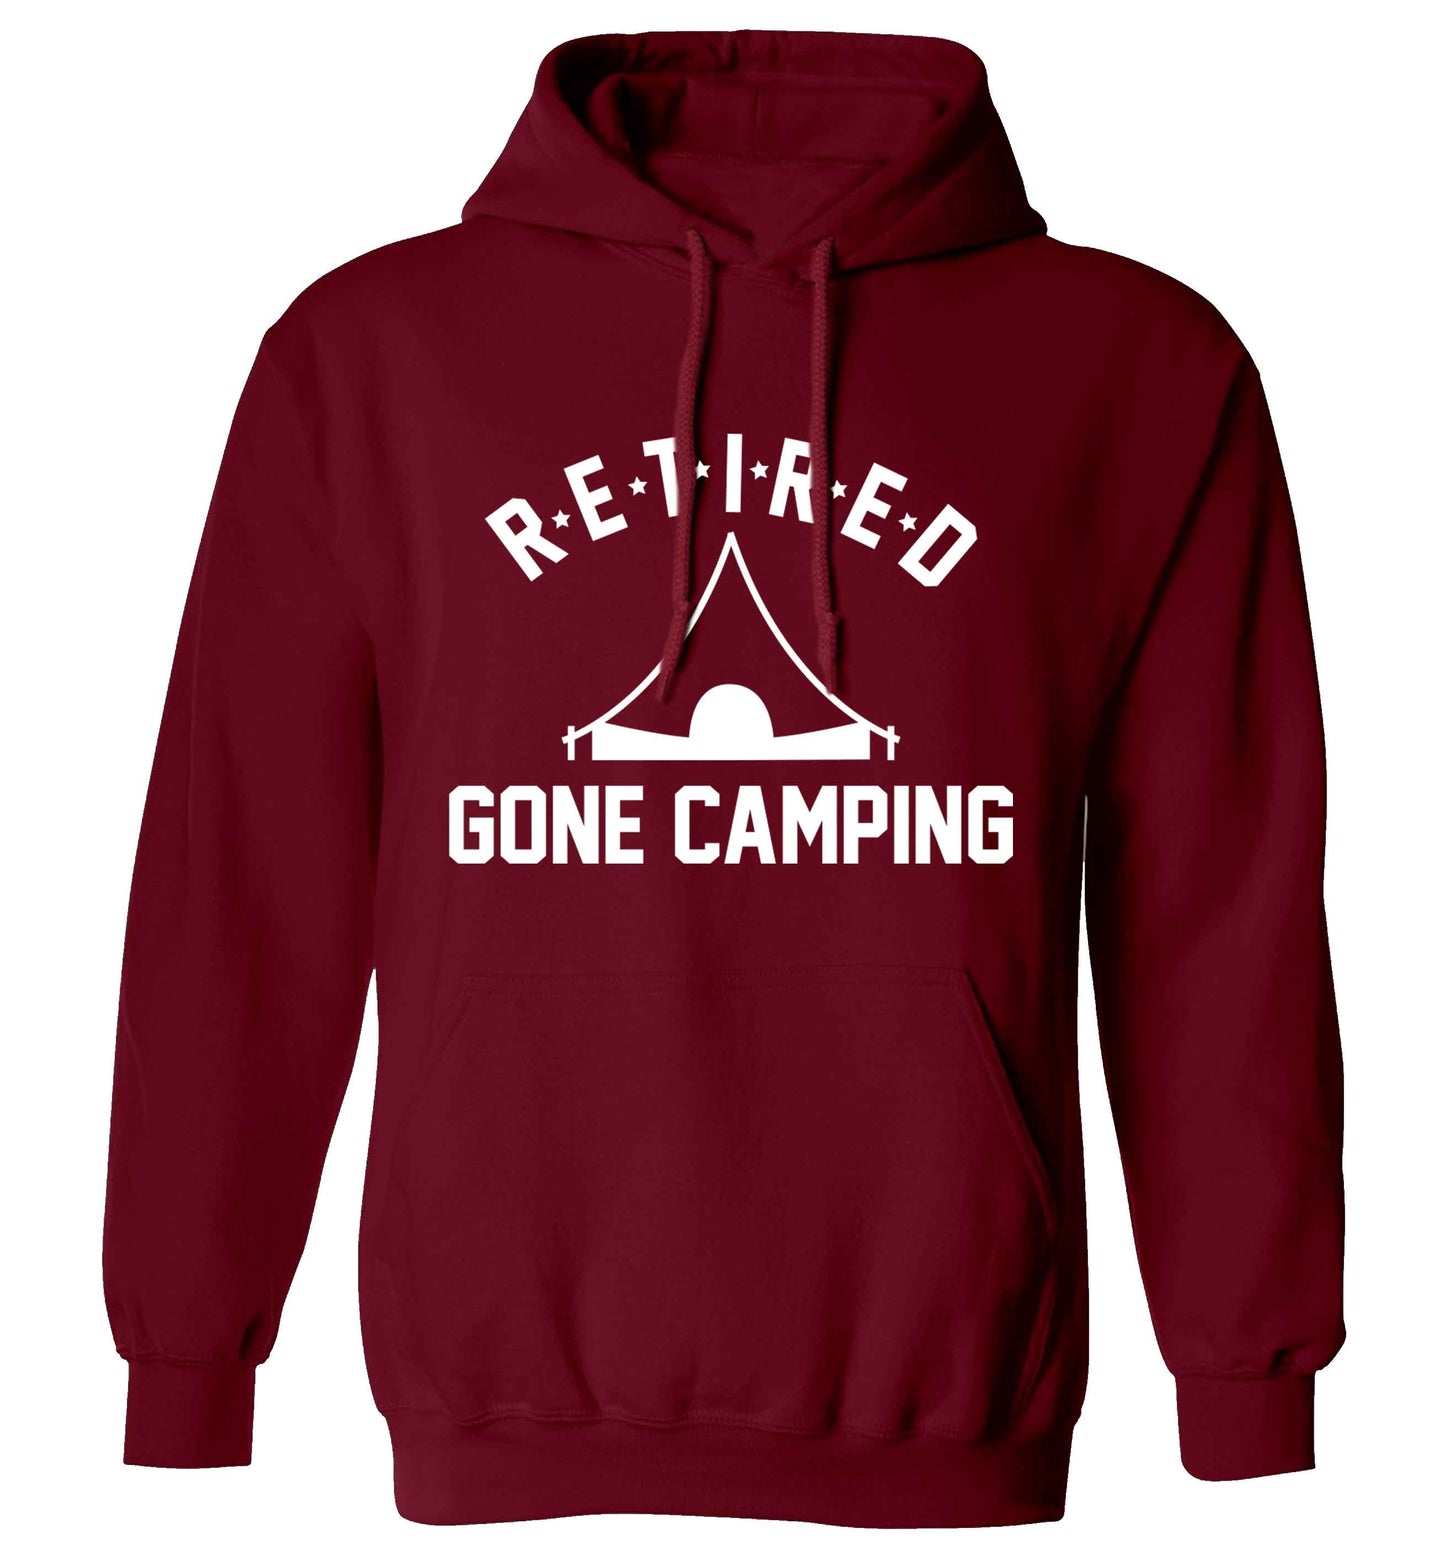 Retired gone camping adults unisex maroon hoodie 2XL